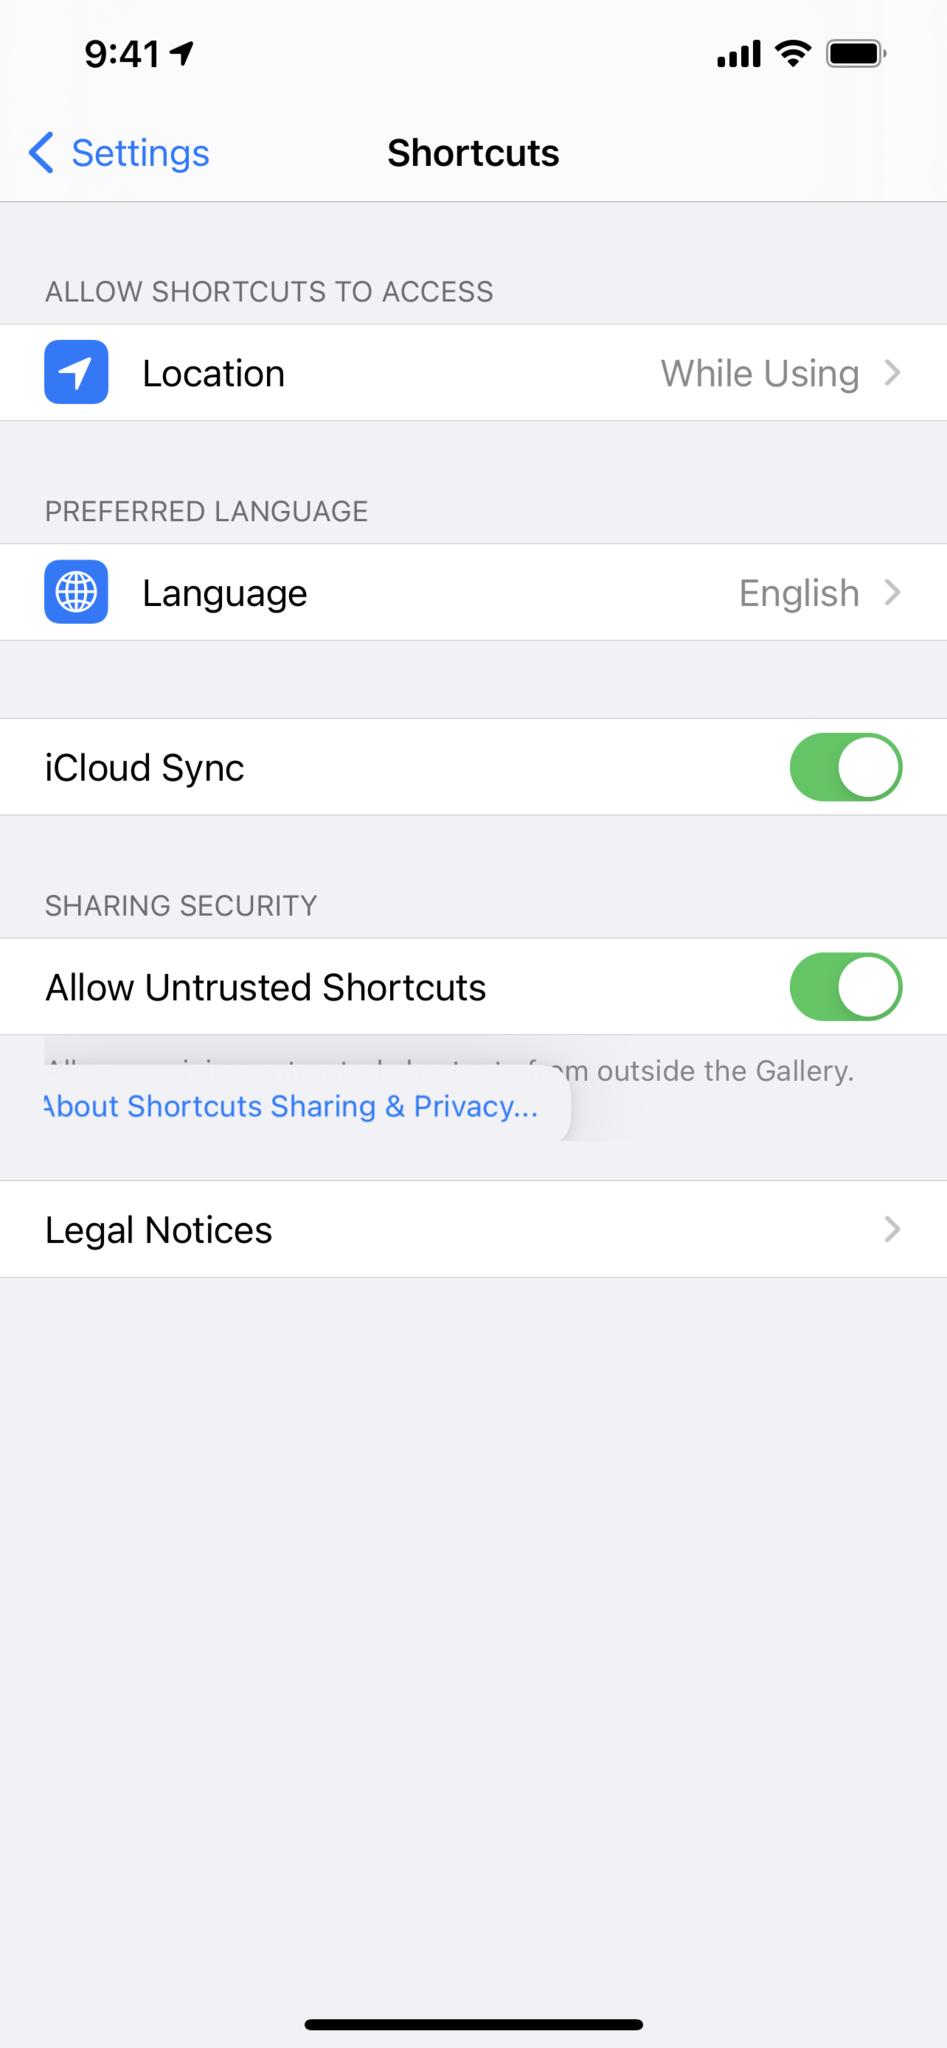 Screenshot showing Shortcuts settings with "About Shortcuts Sharing & Privacy" highlighted and expanding under a tap-and-hold gesture.